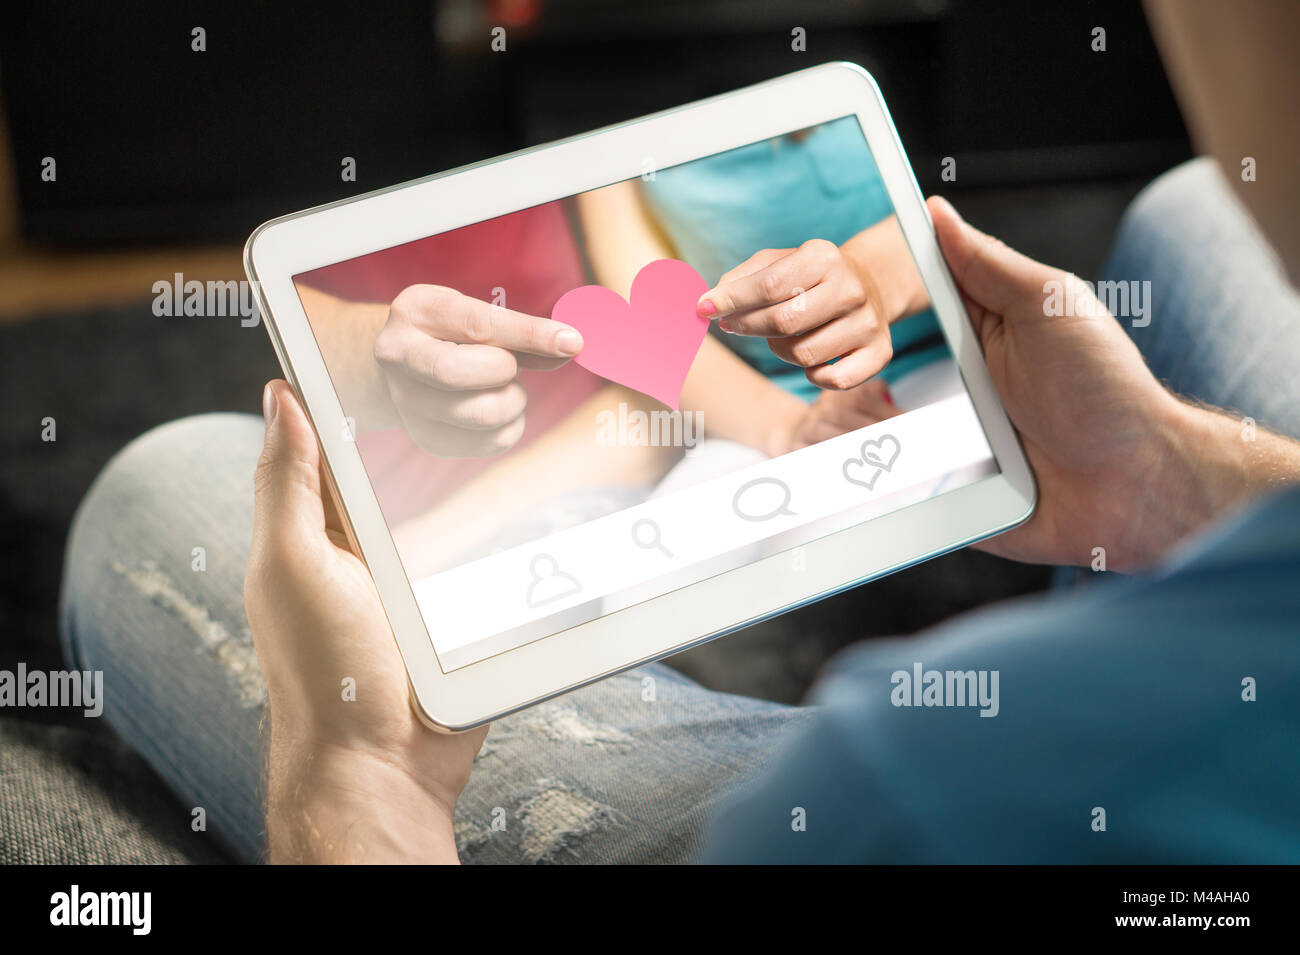 Online dating concept. Imaginary application or website. Finding love from internet using app. Man using and holding tablet and smart device at home. Stock Photo